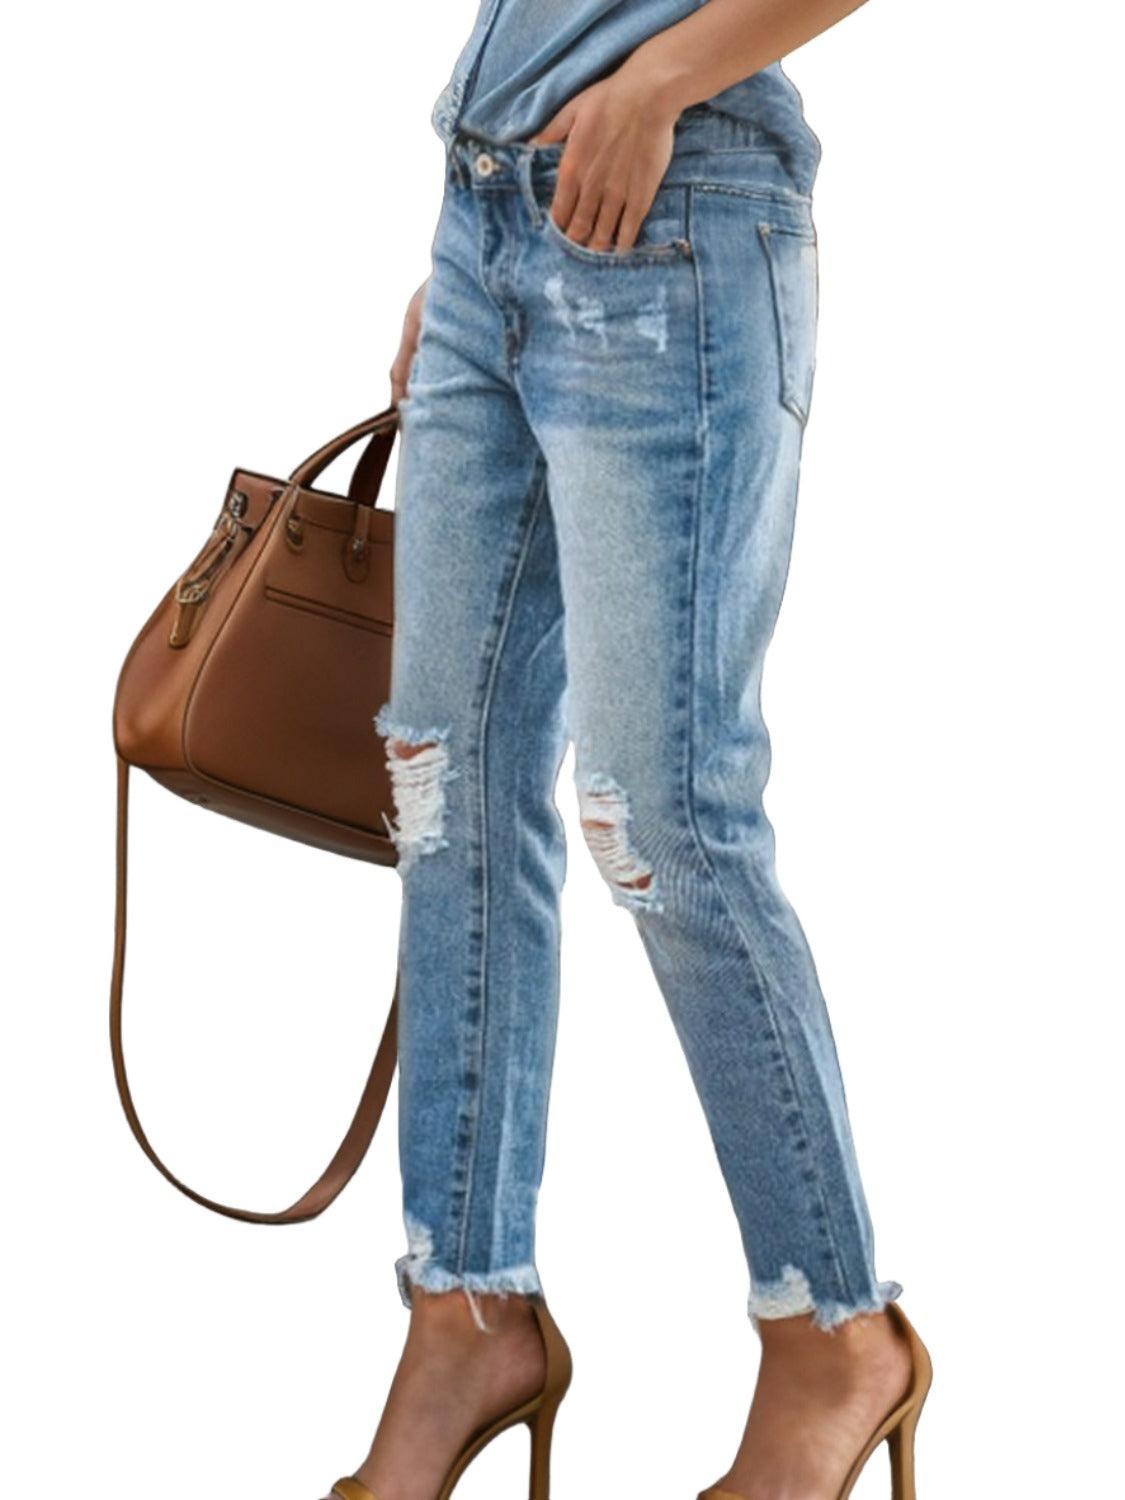 Women's Jeans Distressed Raw Hem Jeans with Pockets